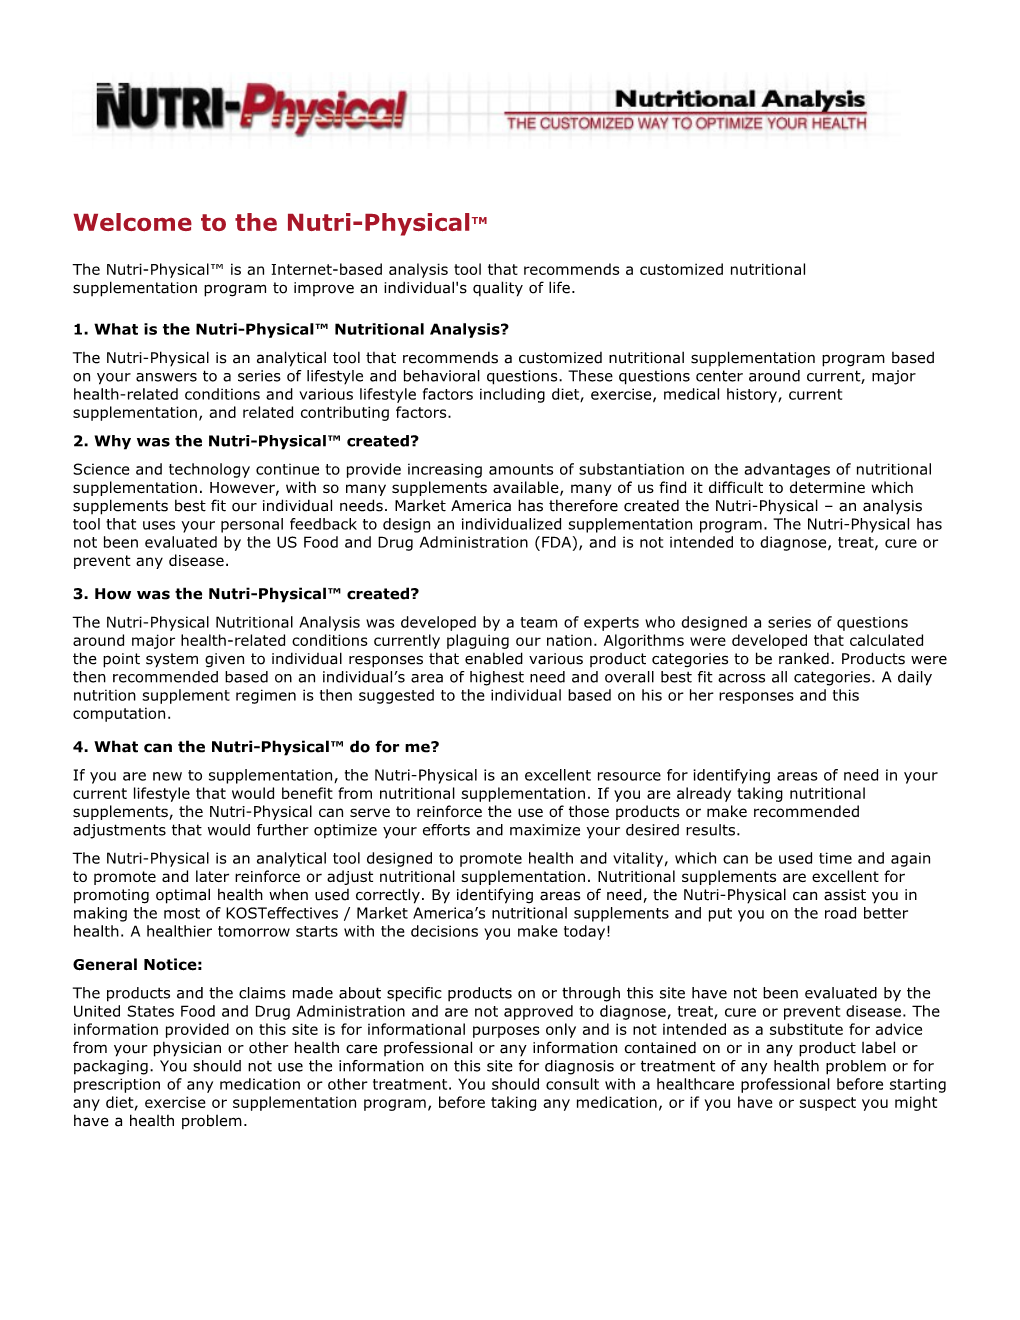 1. What Is the Nutri-Physical Nutritional Analysis? the Nutri-Physical Is an Analytical